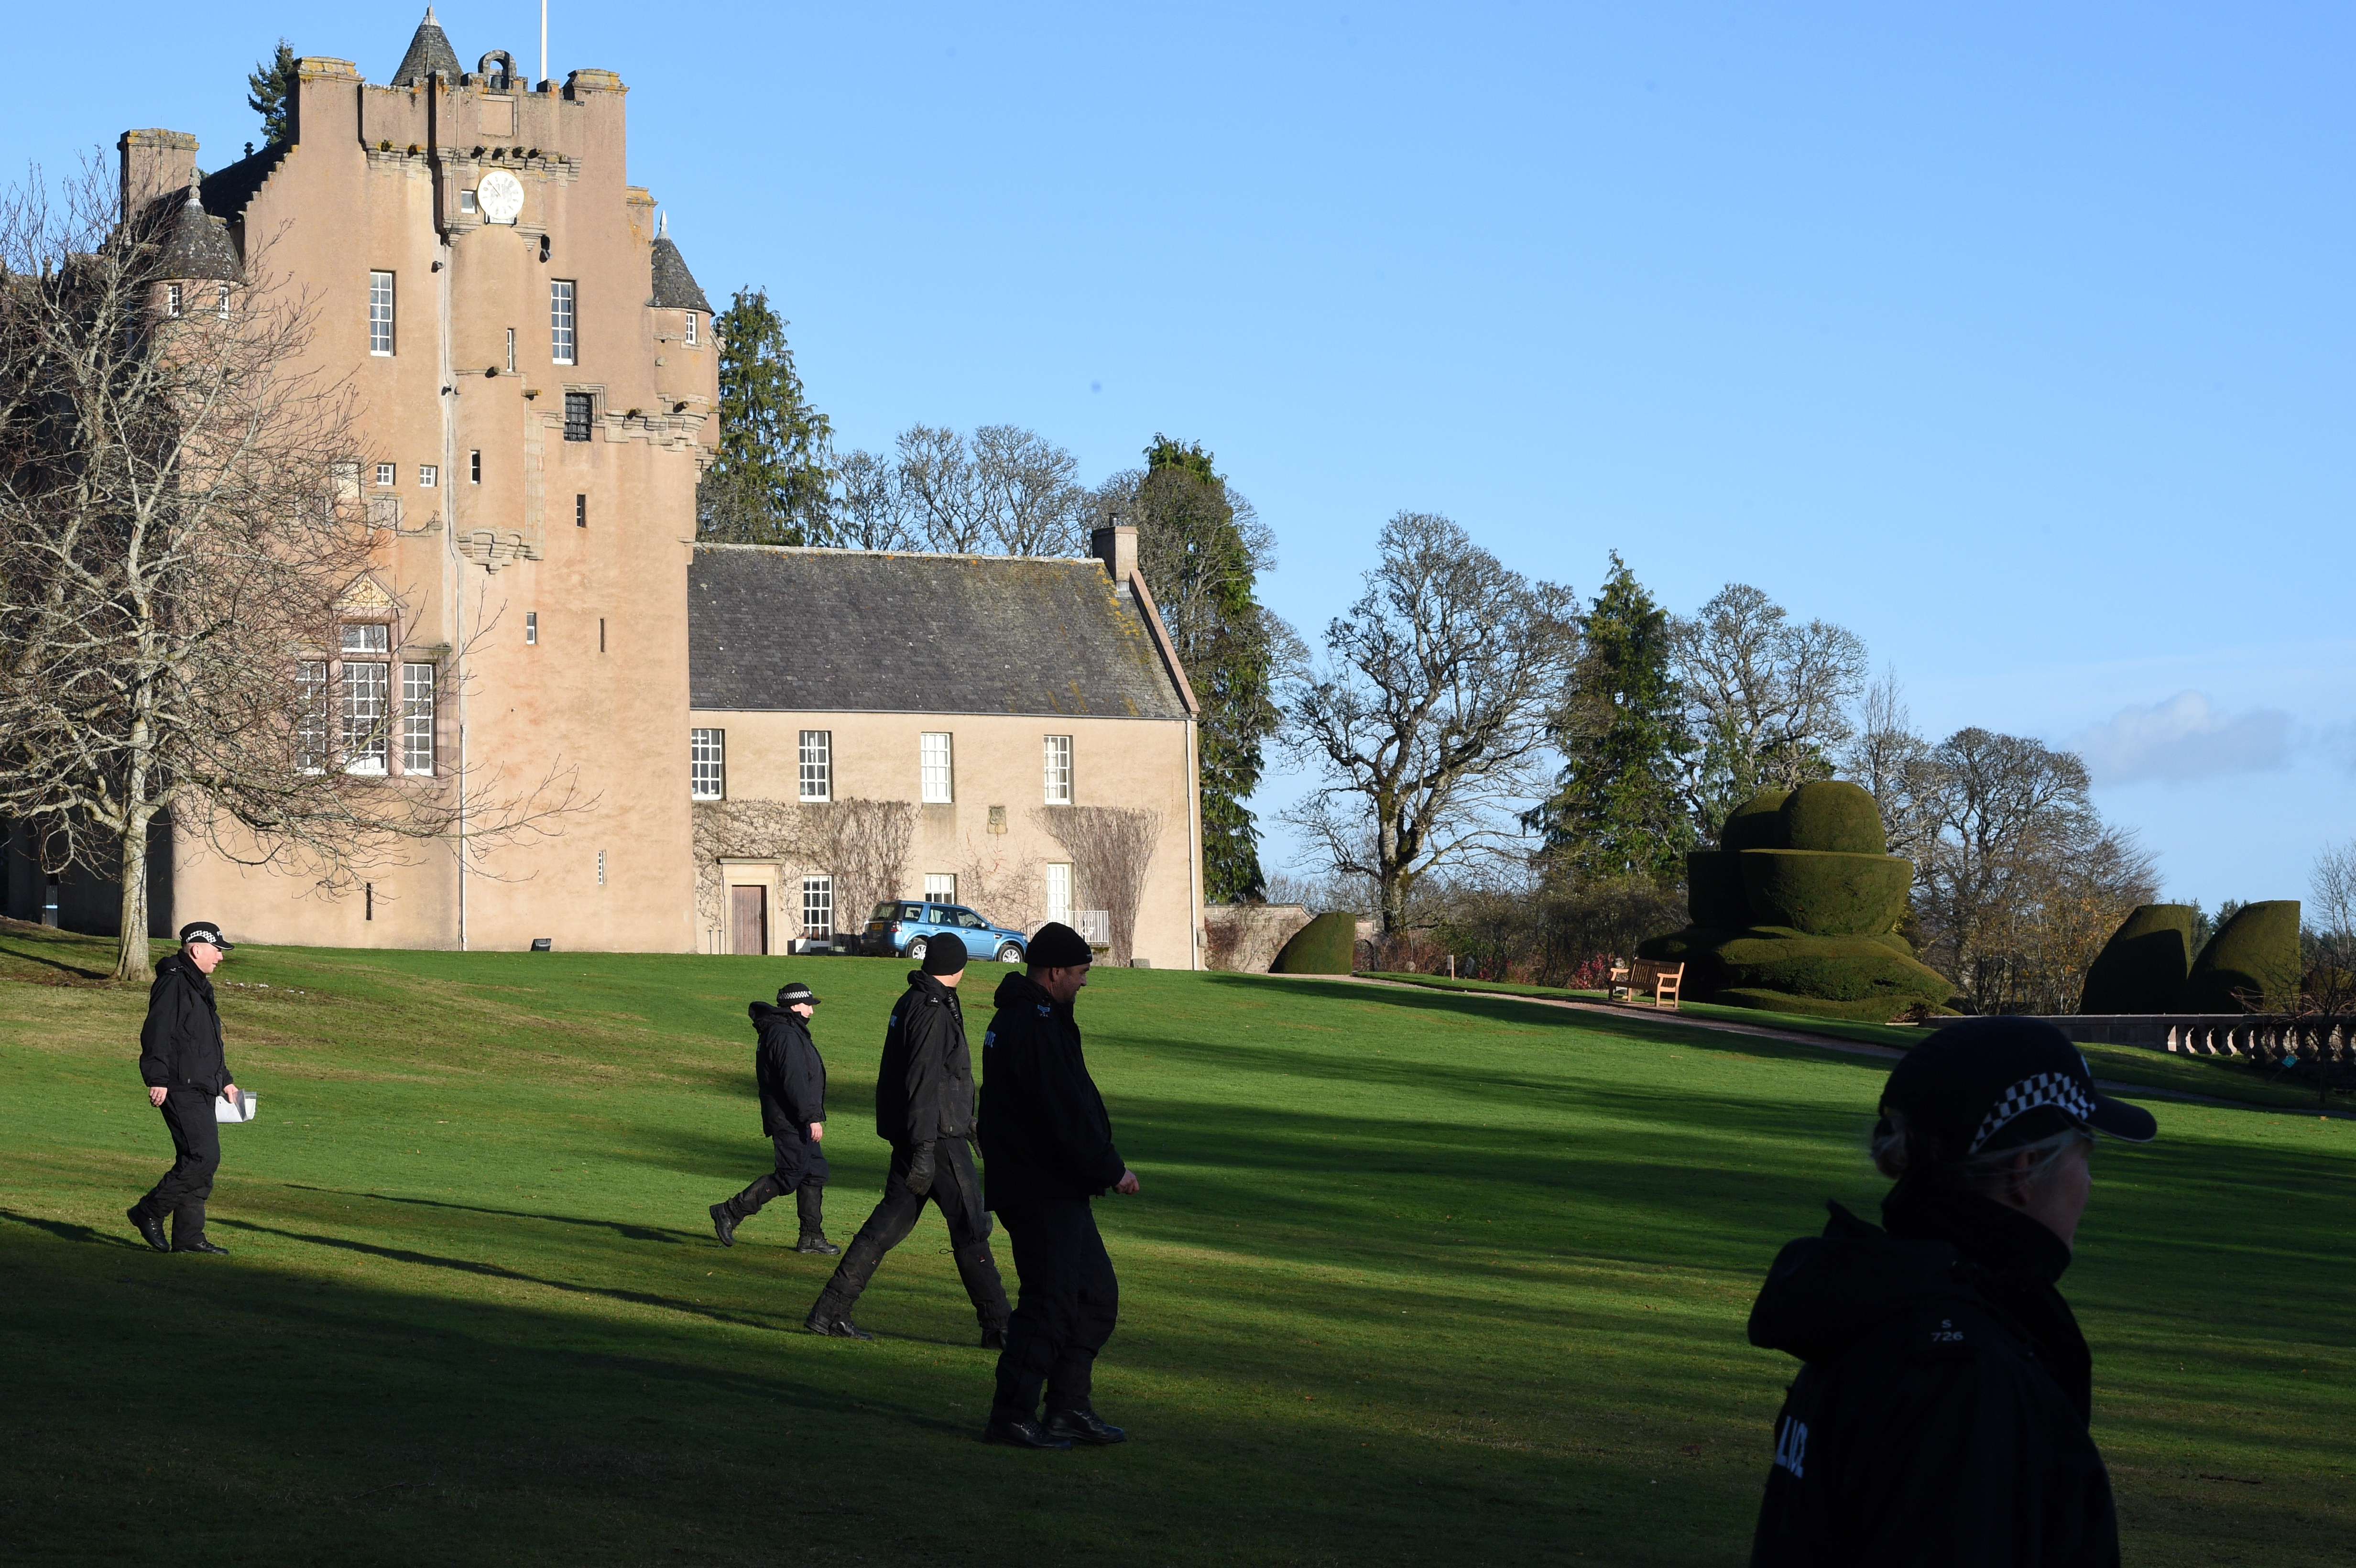 Police search the grounds of Crathes Castle for signs of missing Aberdeen teenager Liam Smith.